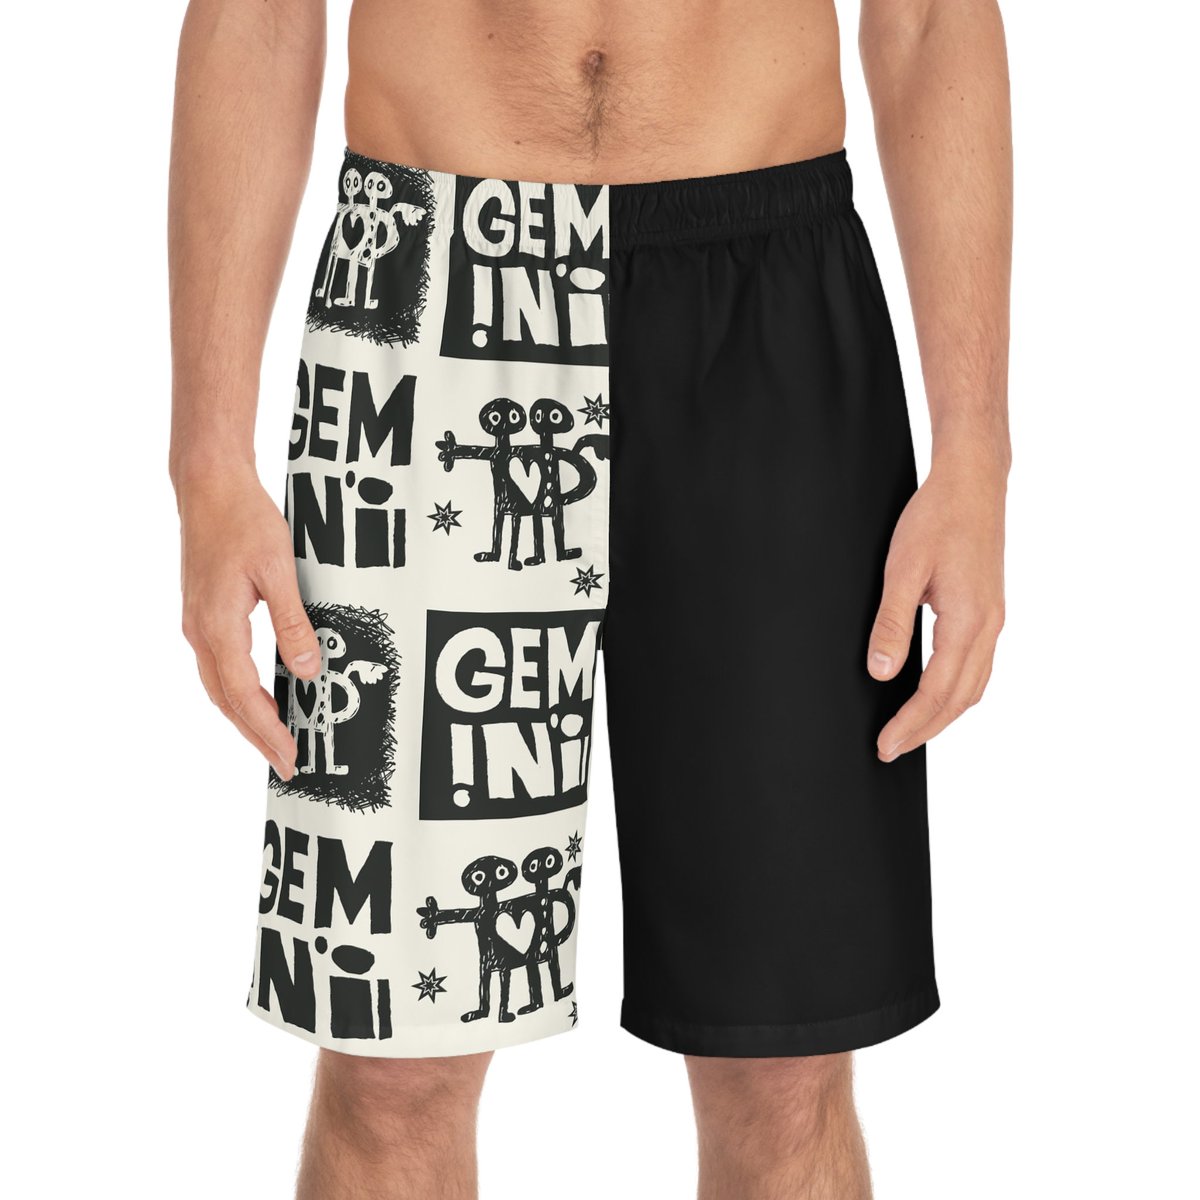 Excited to share the latest addition to my #etsy shop: Dual Natured Gemini Zodiac Men's Board Shorts: Range and Variety with Astrology-Inspired Swimwear - Sizzling Summer Swimwear Sale etsy.me/3OJQKjA #dualnatured #geminizodiac #mensboardshorts #rangeandvariety